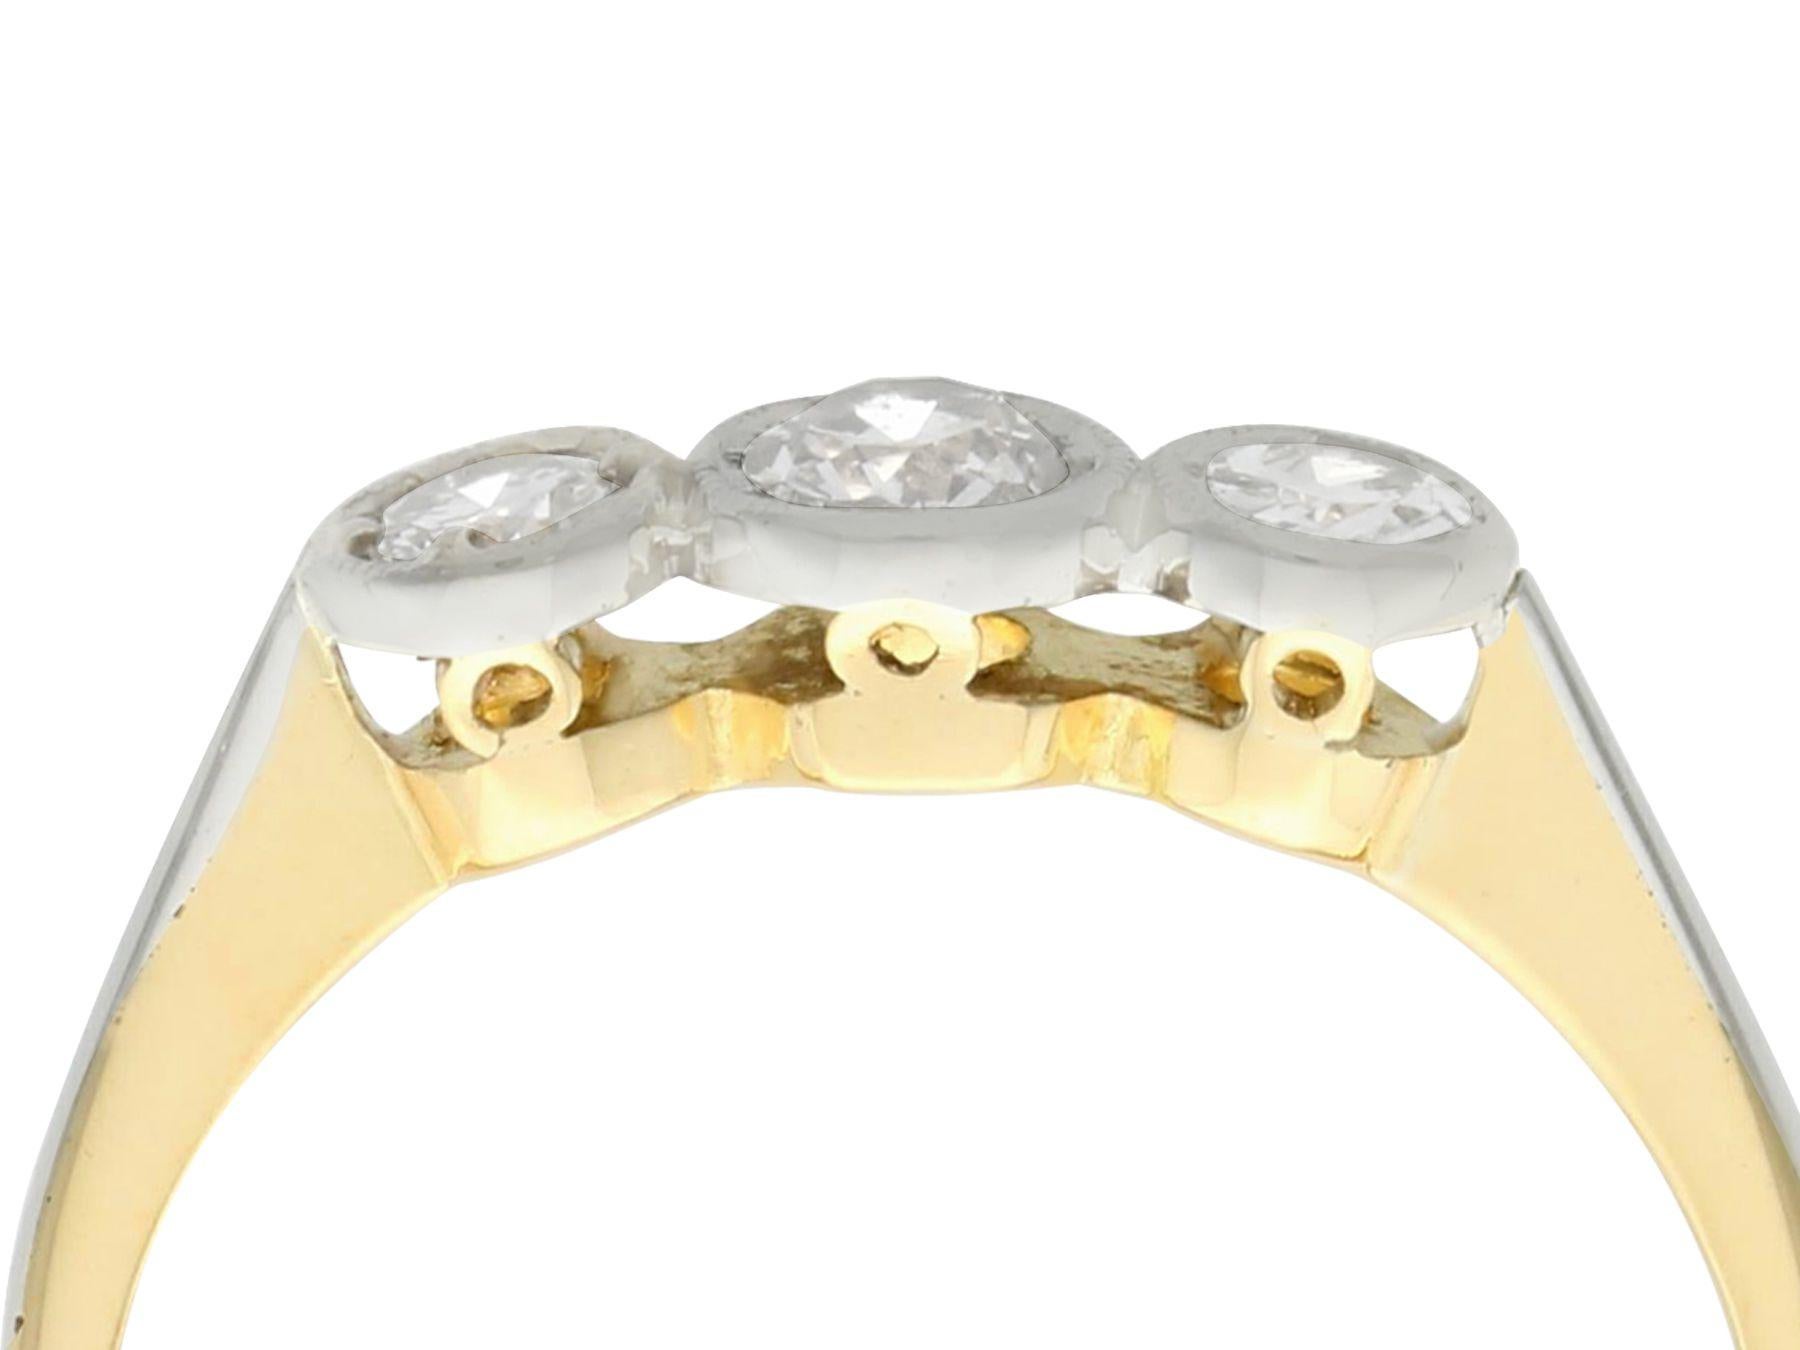 A fine and impressive antique 0.50 carat diamond and 18 karat yellow gold, platinum set trilogy ring; part of our diverse antique jewelry collections.

This fine and impressive collet set diamond trilogy ring has been crafted in 18k yellow gold with